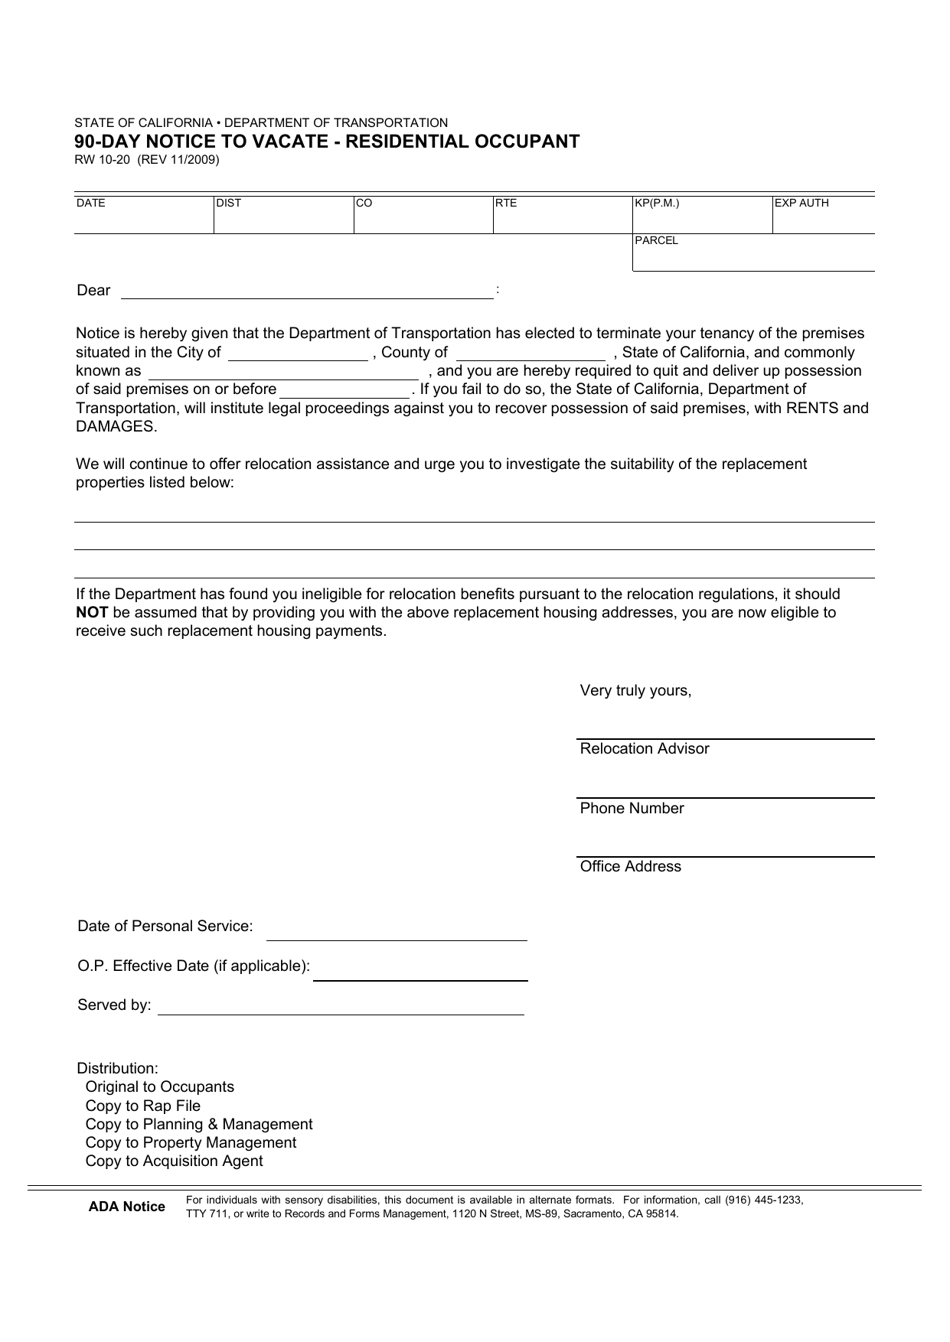 Form RW10-20 90-day Notice to Vacate - Residential Occupant - California, Page 1